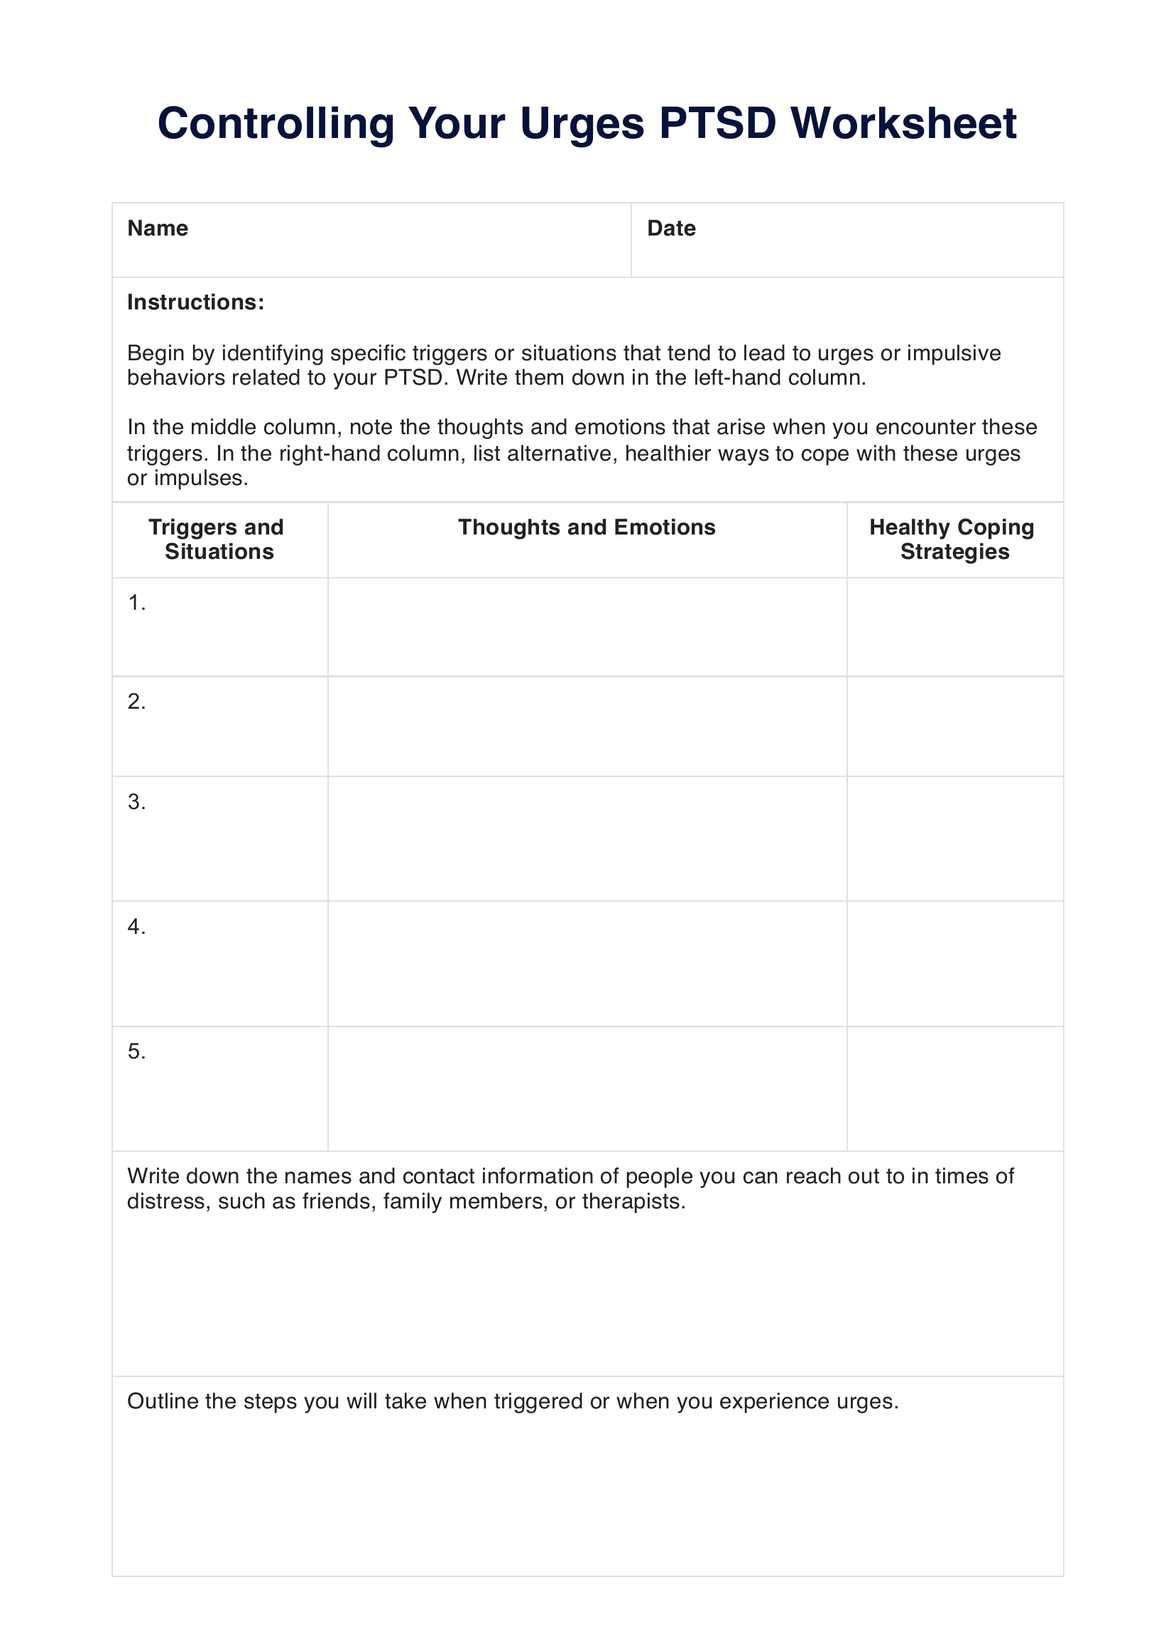 Controlling Your Urges PTSD Worksheets PDF Example